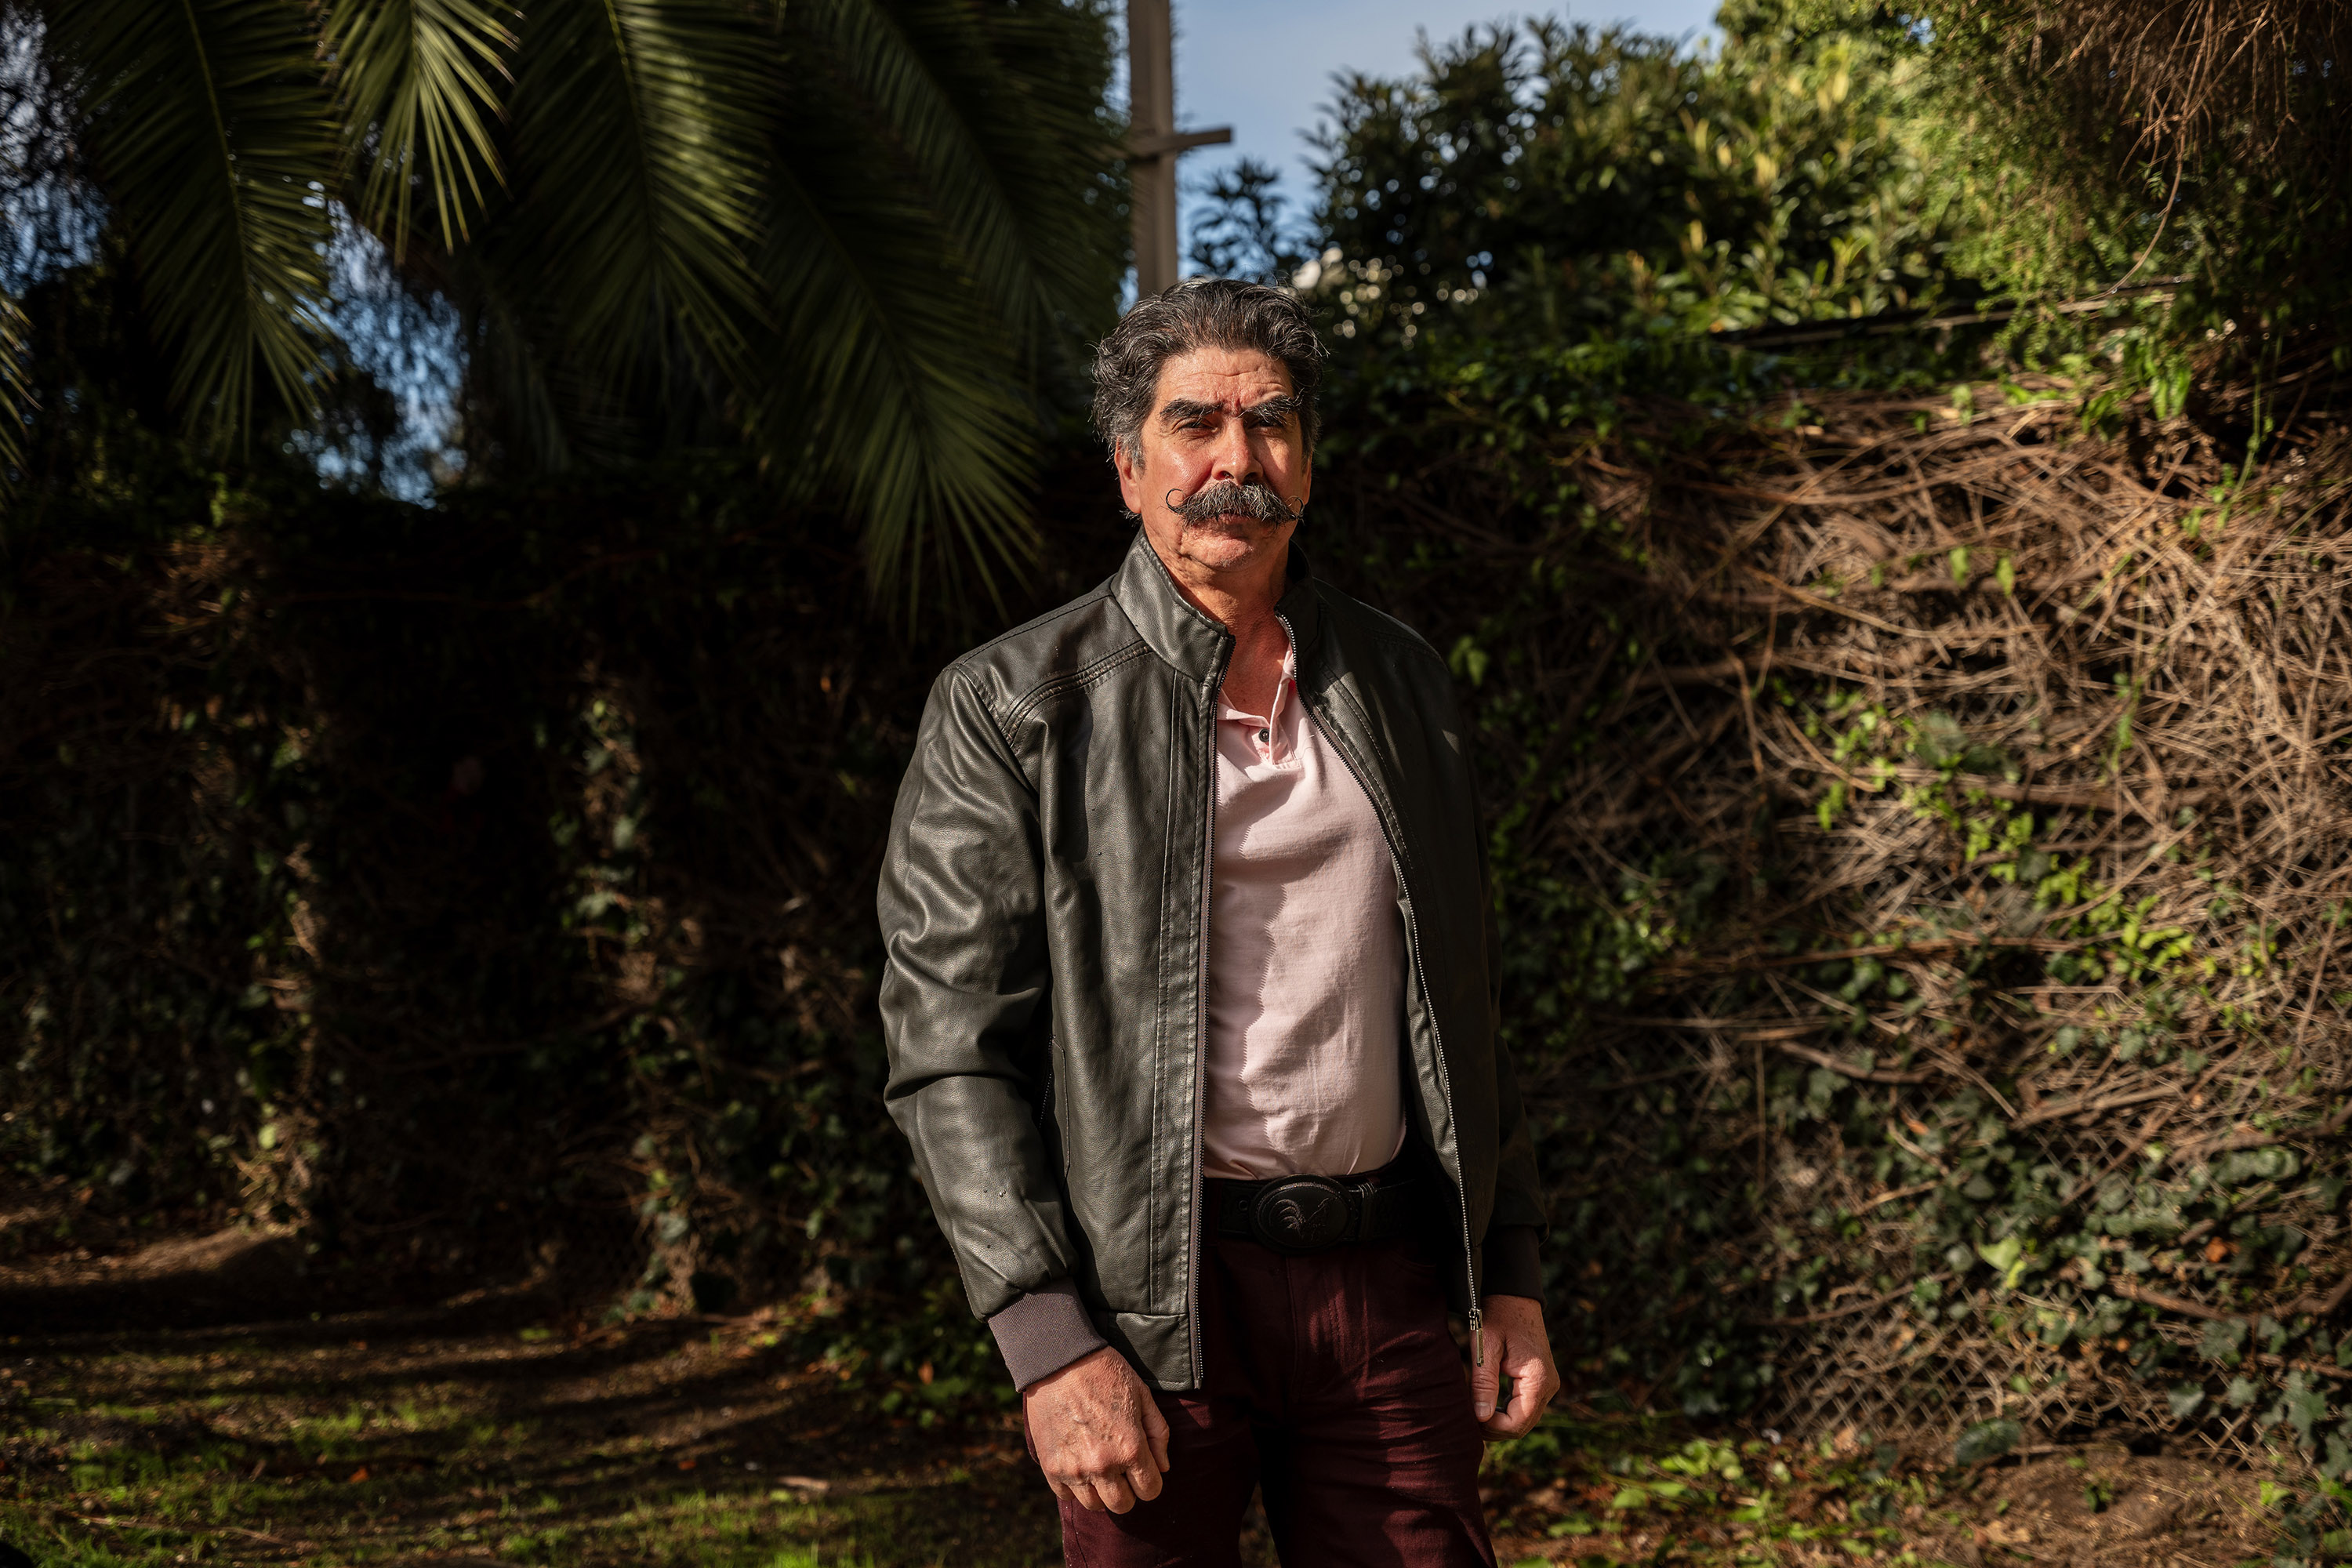 A portrait of Antonio Abundis. He stands outside a lush, green area on a sunny day. Palm fronds and ivy grow in the background.